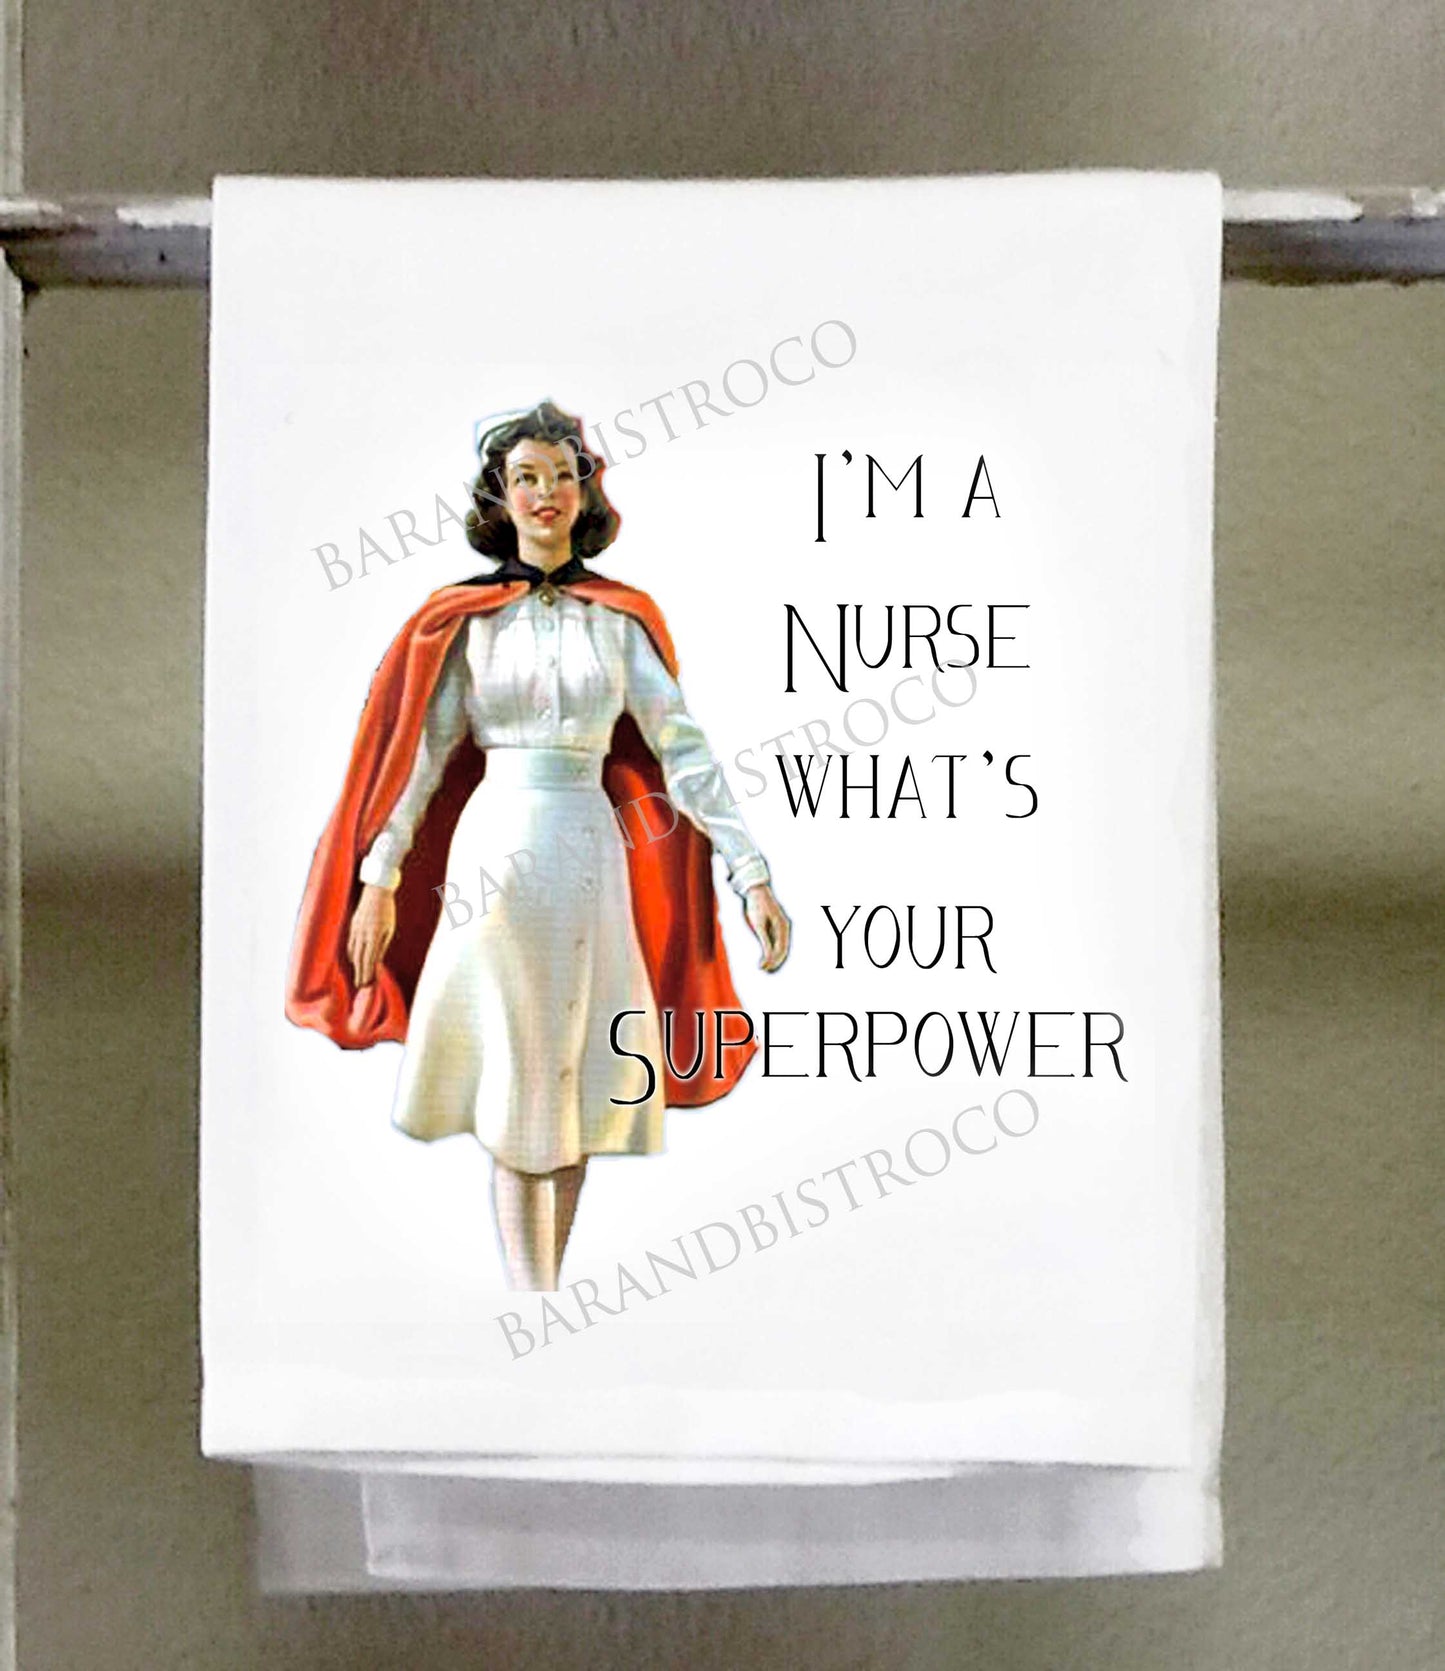 Sassy Girl, I'm a nurse what's your superpower